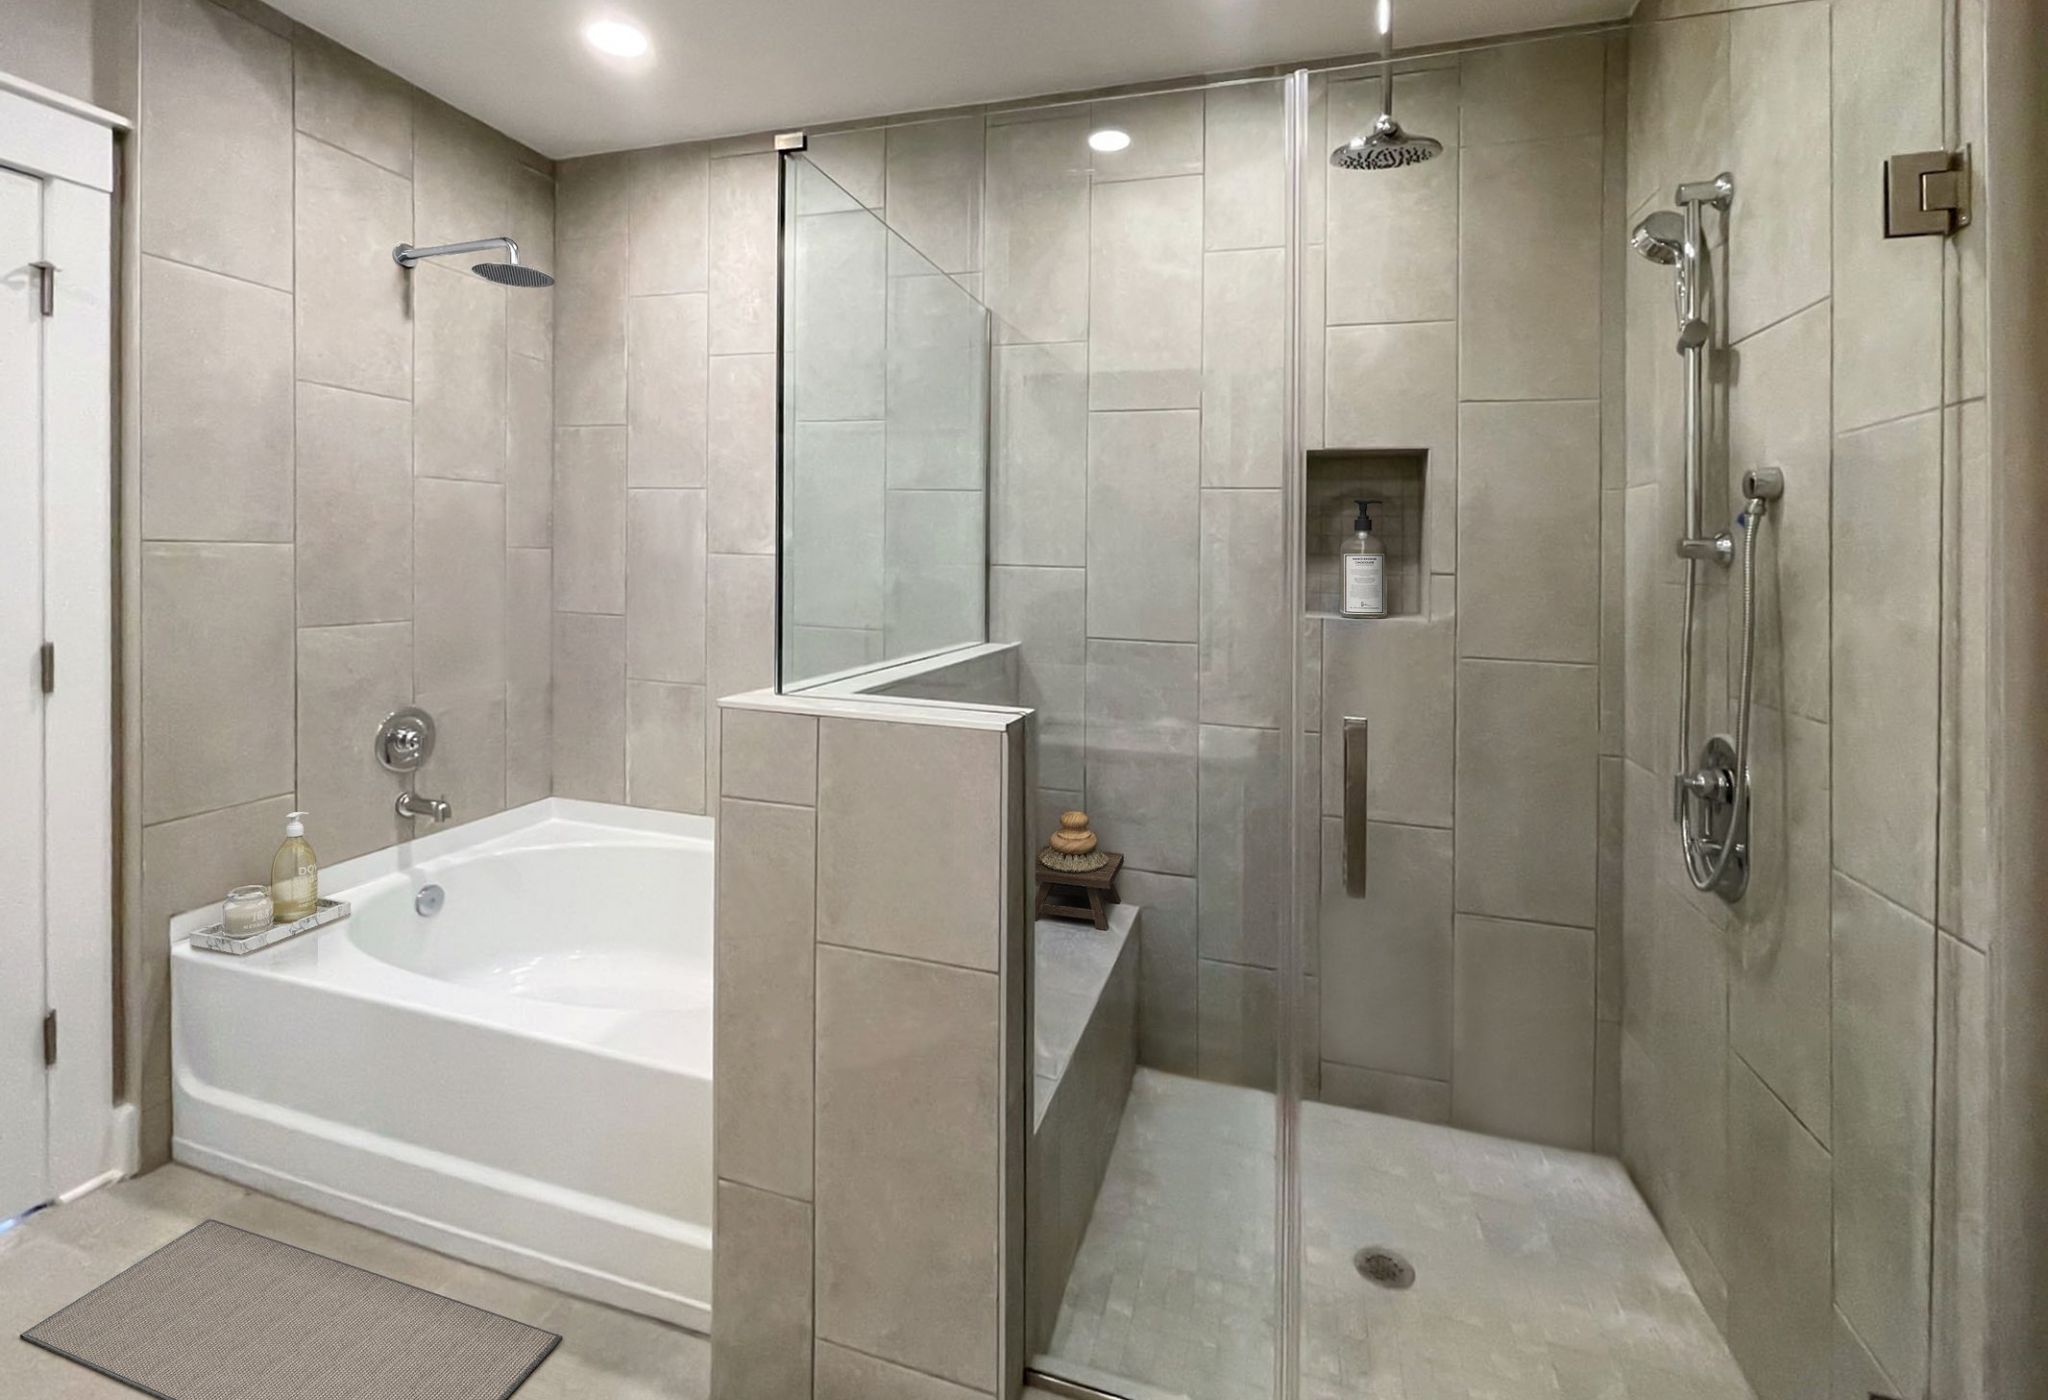 Luxury Charlotte apartment bathroom with tile-surround shower and tub, tile flooring, and cabinet storage